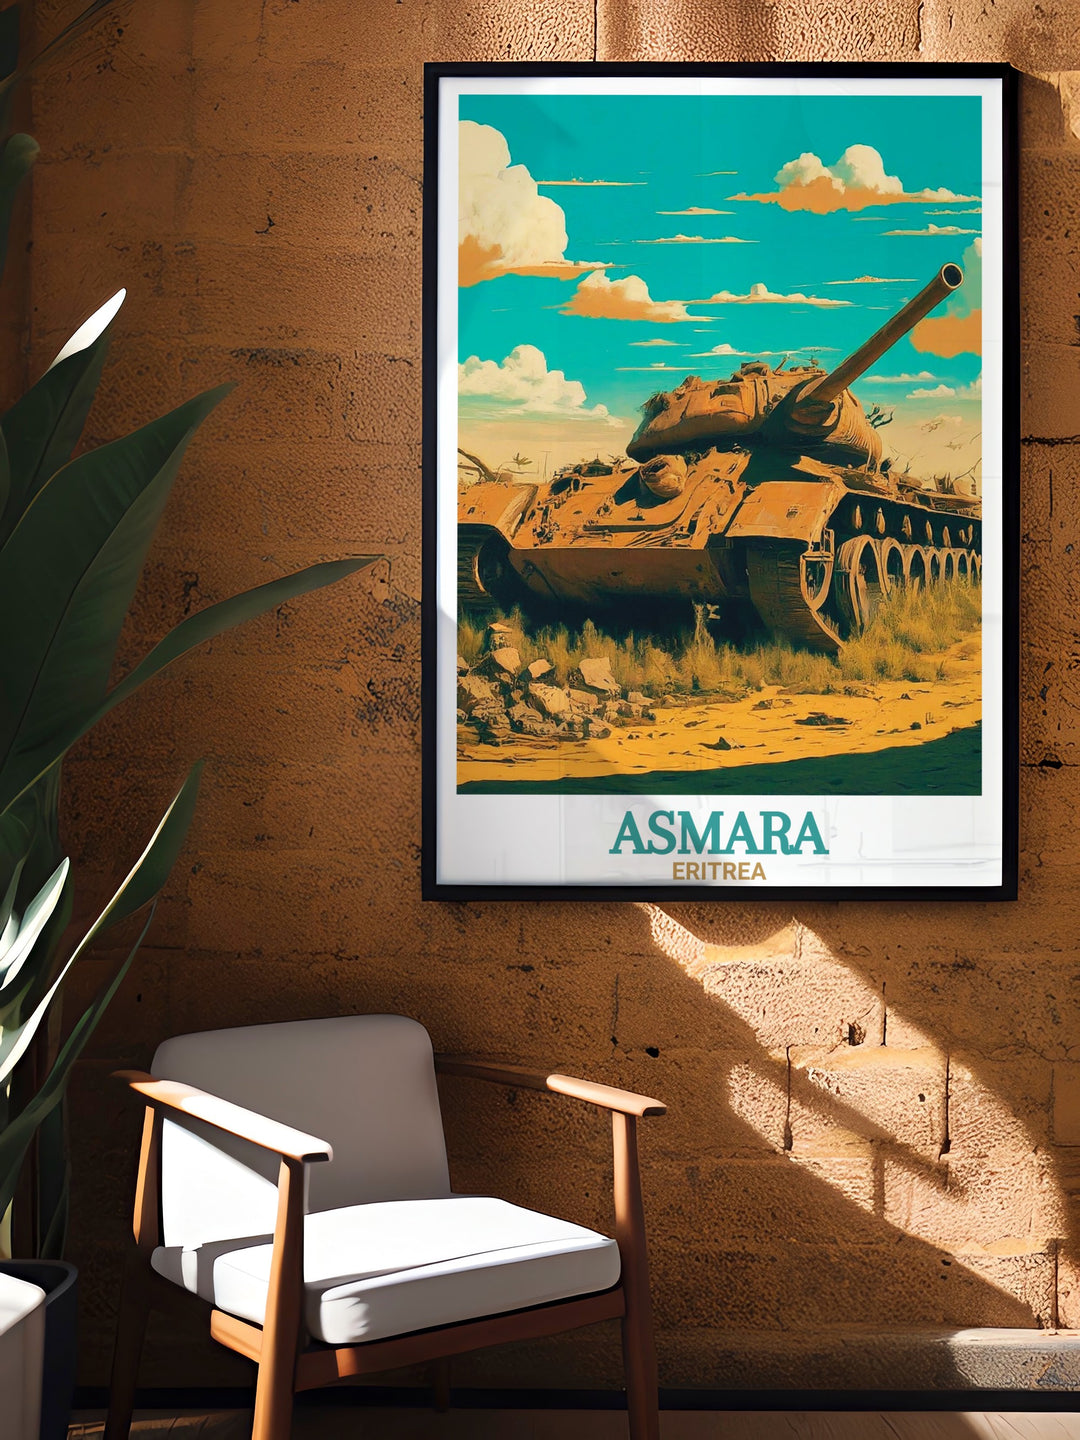 Tank Graveyard artwork depicting rows of decommissioned military equipment in Asmara, ideal for adding intrigue to any room.